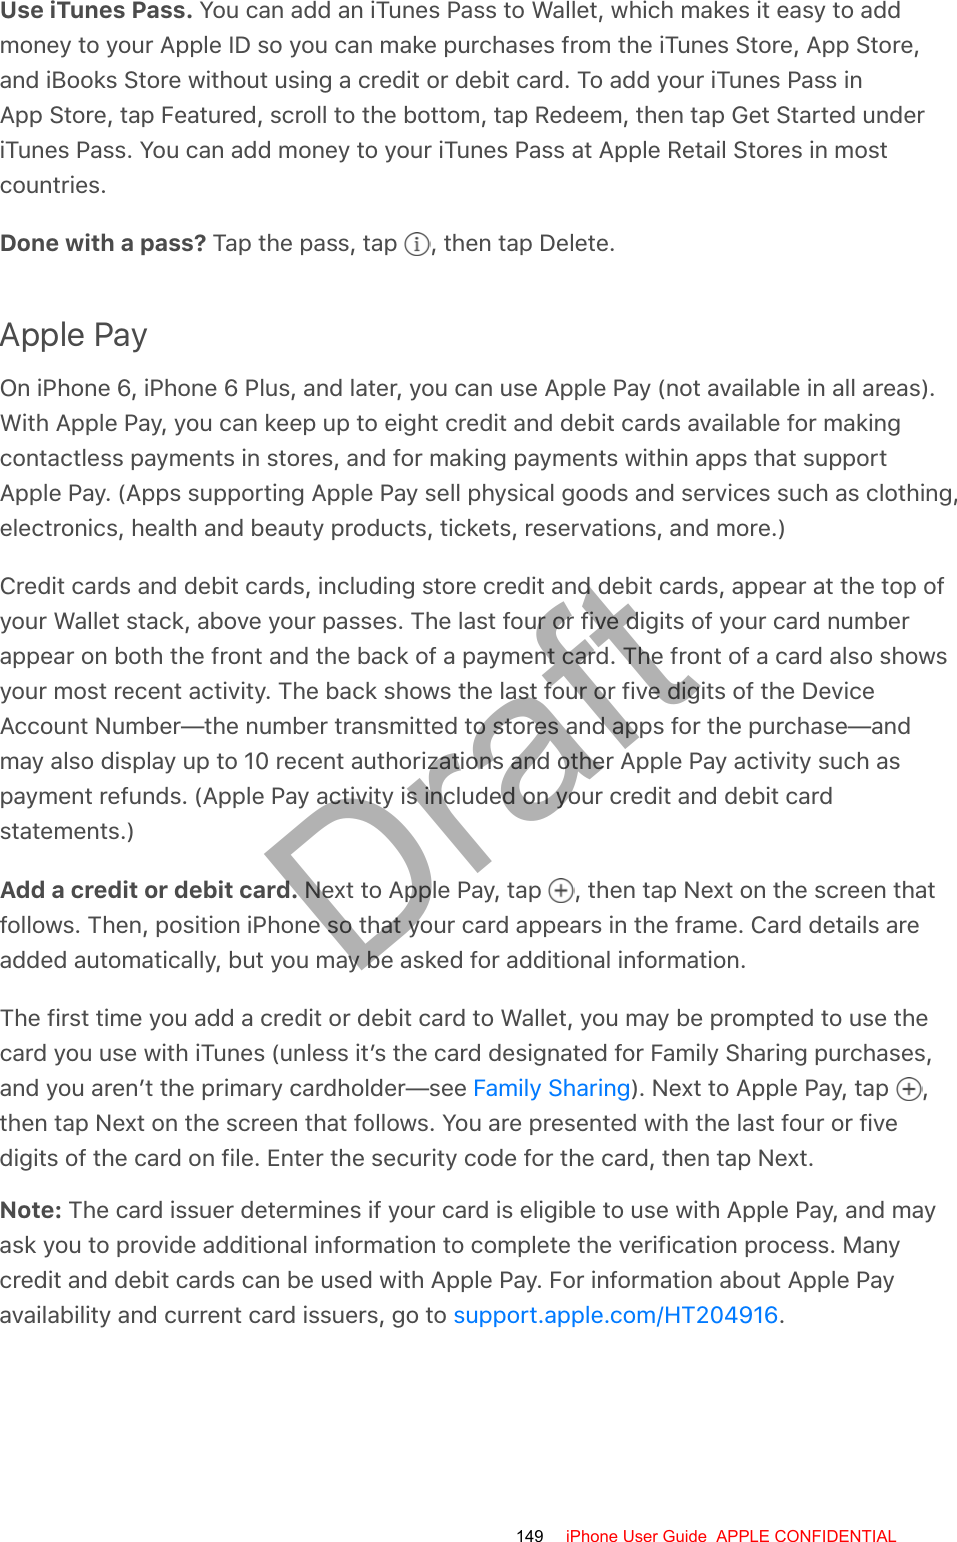 Use iTunes Pass. You can add an iTunes Pass to Wallet, which makes it easy to addmoney to your Apple ID so you can make purchases from the iTunes Store, App Store,and iBooks Store without using a credit or debit card. To add your iTunes Pass inApp Store, tap Featured, scroll to the bottom, tap Redeem, then tap Get Started underiTunes Pass. You can add money to your iTunes Pass at Apple Retail Stores in mostcountries.Done with a pass? Tap the pass, tap  , then tap Delete.Apple PayOn iPhone 6, iPhone 6 Plus, and later, you can use Apple Pay (not available in all areas).With Apple Pay, you can keep up to eight credit and debit cards available for makingcontactless payments in stores, and for making payments within apps that supportApple Pay. (Apps supporting Apple Pay sell physical goods and services such as clothing,electronics, health and beauty products, tickets, reservations, and more.)Credit cards and debit cards, including store credit and debit cards, appear at the top ofyour Wallet stack, above your passes. The last four or five digits of your card numberappear on both the front and the back of a payment card. The front of a card also showsyour most recent activity. The back shows the last four or five digits of the DeviceAccount Number—the number transmitted to stores and apps for the purchase—andmay also display up to 10 recent authorizations and other Apple Pay activity such aspayment refunds. (Apple Pay activity is included on your credit and debit cardstatements.)Add a credit or debit card. Next to Apple Pay, tap  , then tap Next on the screen thatfollows. Then, position iPhone so that your card appears in the frame. Card details areadded automatically, but you may be asked for additional information.The first time you add a credit or debit card to Wallet, you may be prompted to use thecard you use with iTunes (unless it’s the card designated for Family Sharing purchases,and you aren’t the primary cardholder—see  ). Next to Apple Pay, tap  ,then tap Next on the screen that follows. You are presented with the last four or fivedigits of the card on file. Enter the security code for the card, then tap Next.Note: The card issuer determines if your card is eligible to use with Apple Pay, and mayask you to provide additional information to complete the verification process. Manycredit and debit cards can be used with Apple Pay. For information about Apple Payavailability and current card issuers, go to  .Family Sharingsupport.apple.com/HT204916149 iPhone User Guide  APPLE CONFIDENTIALDraft